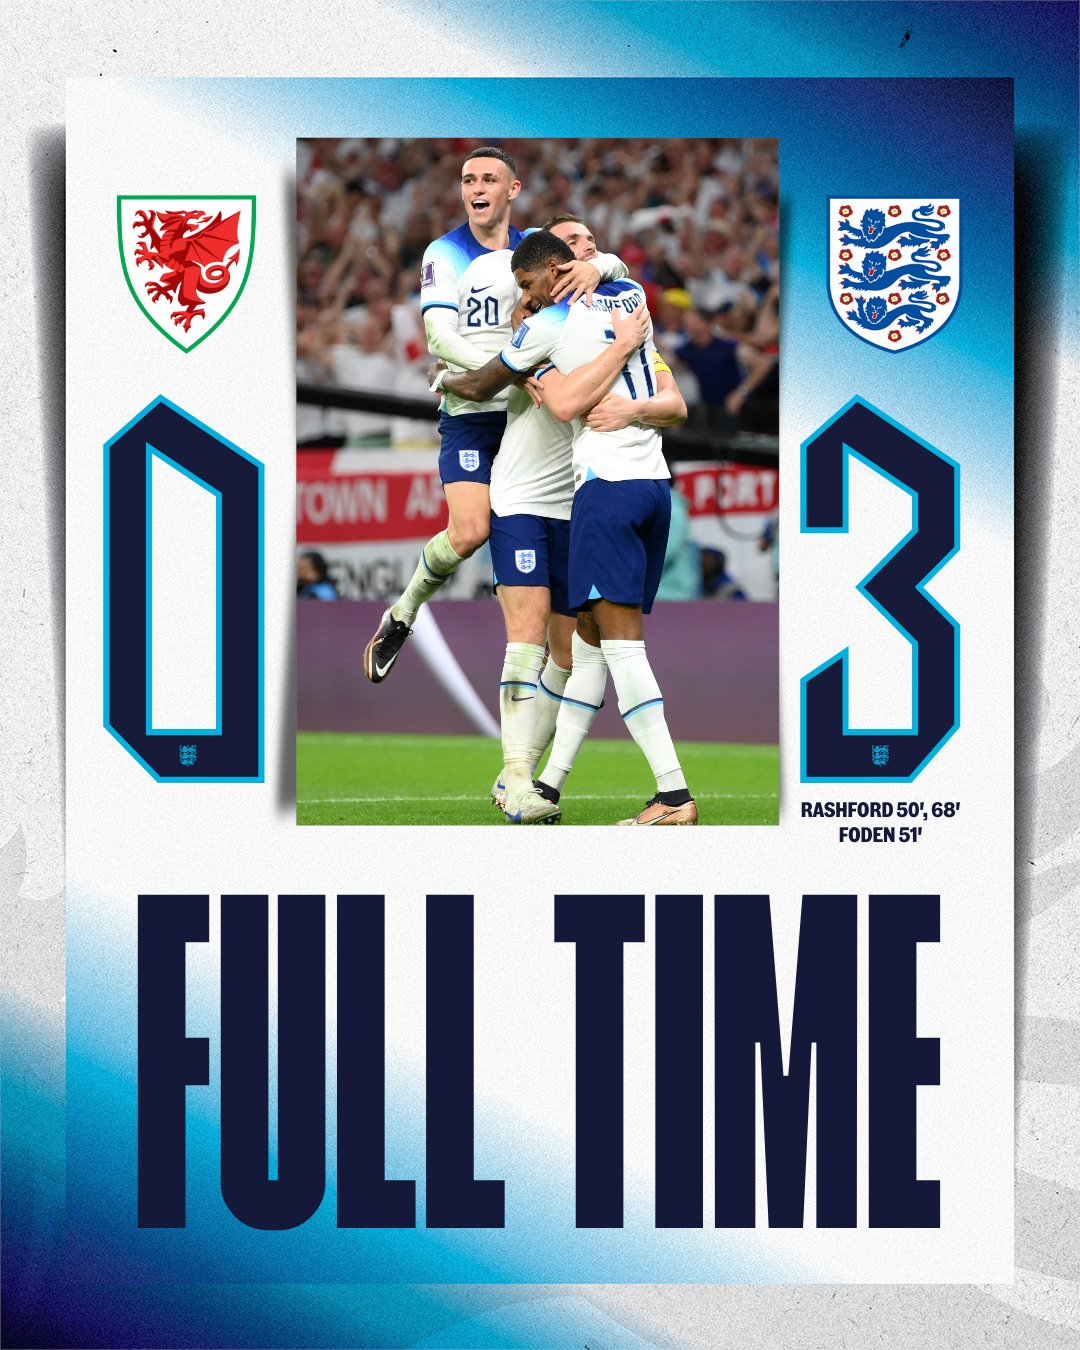 Full-time: Wales 0-3 England